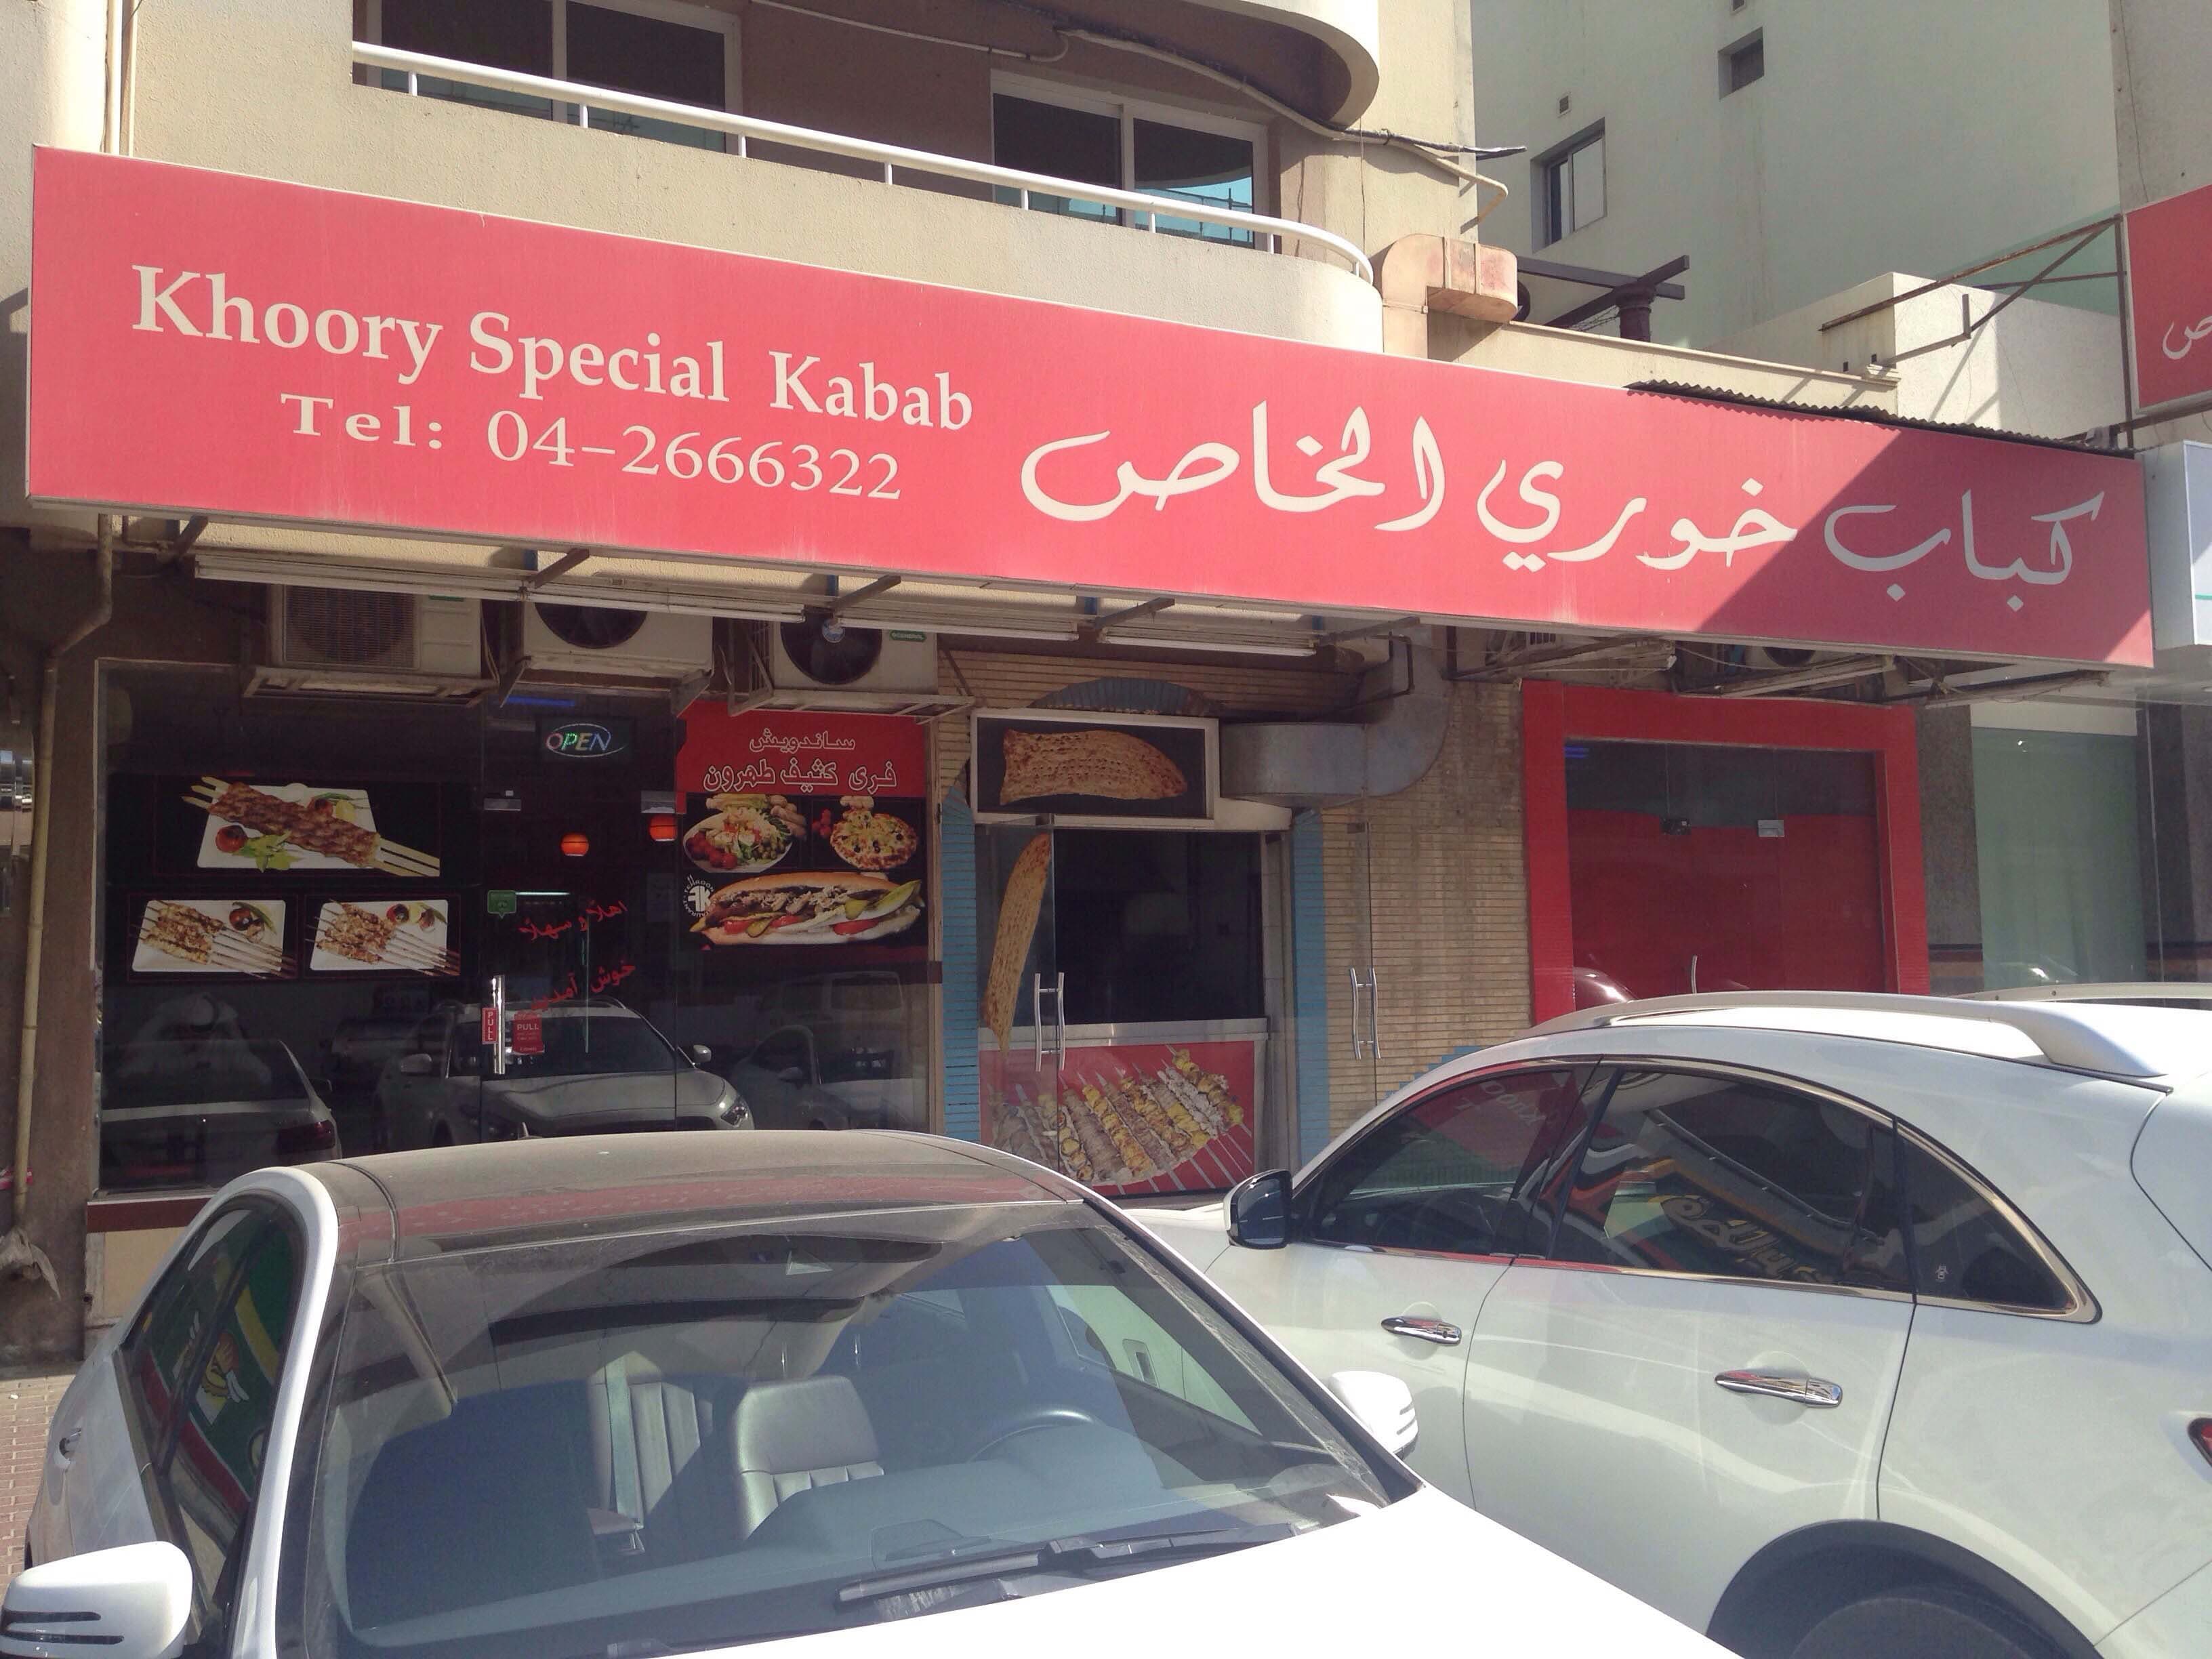 Khoory Special Kabab